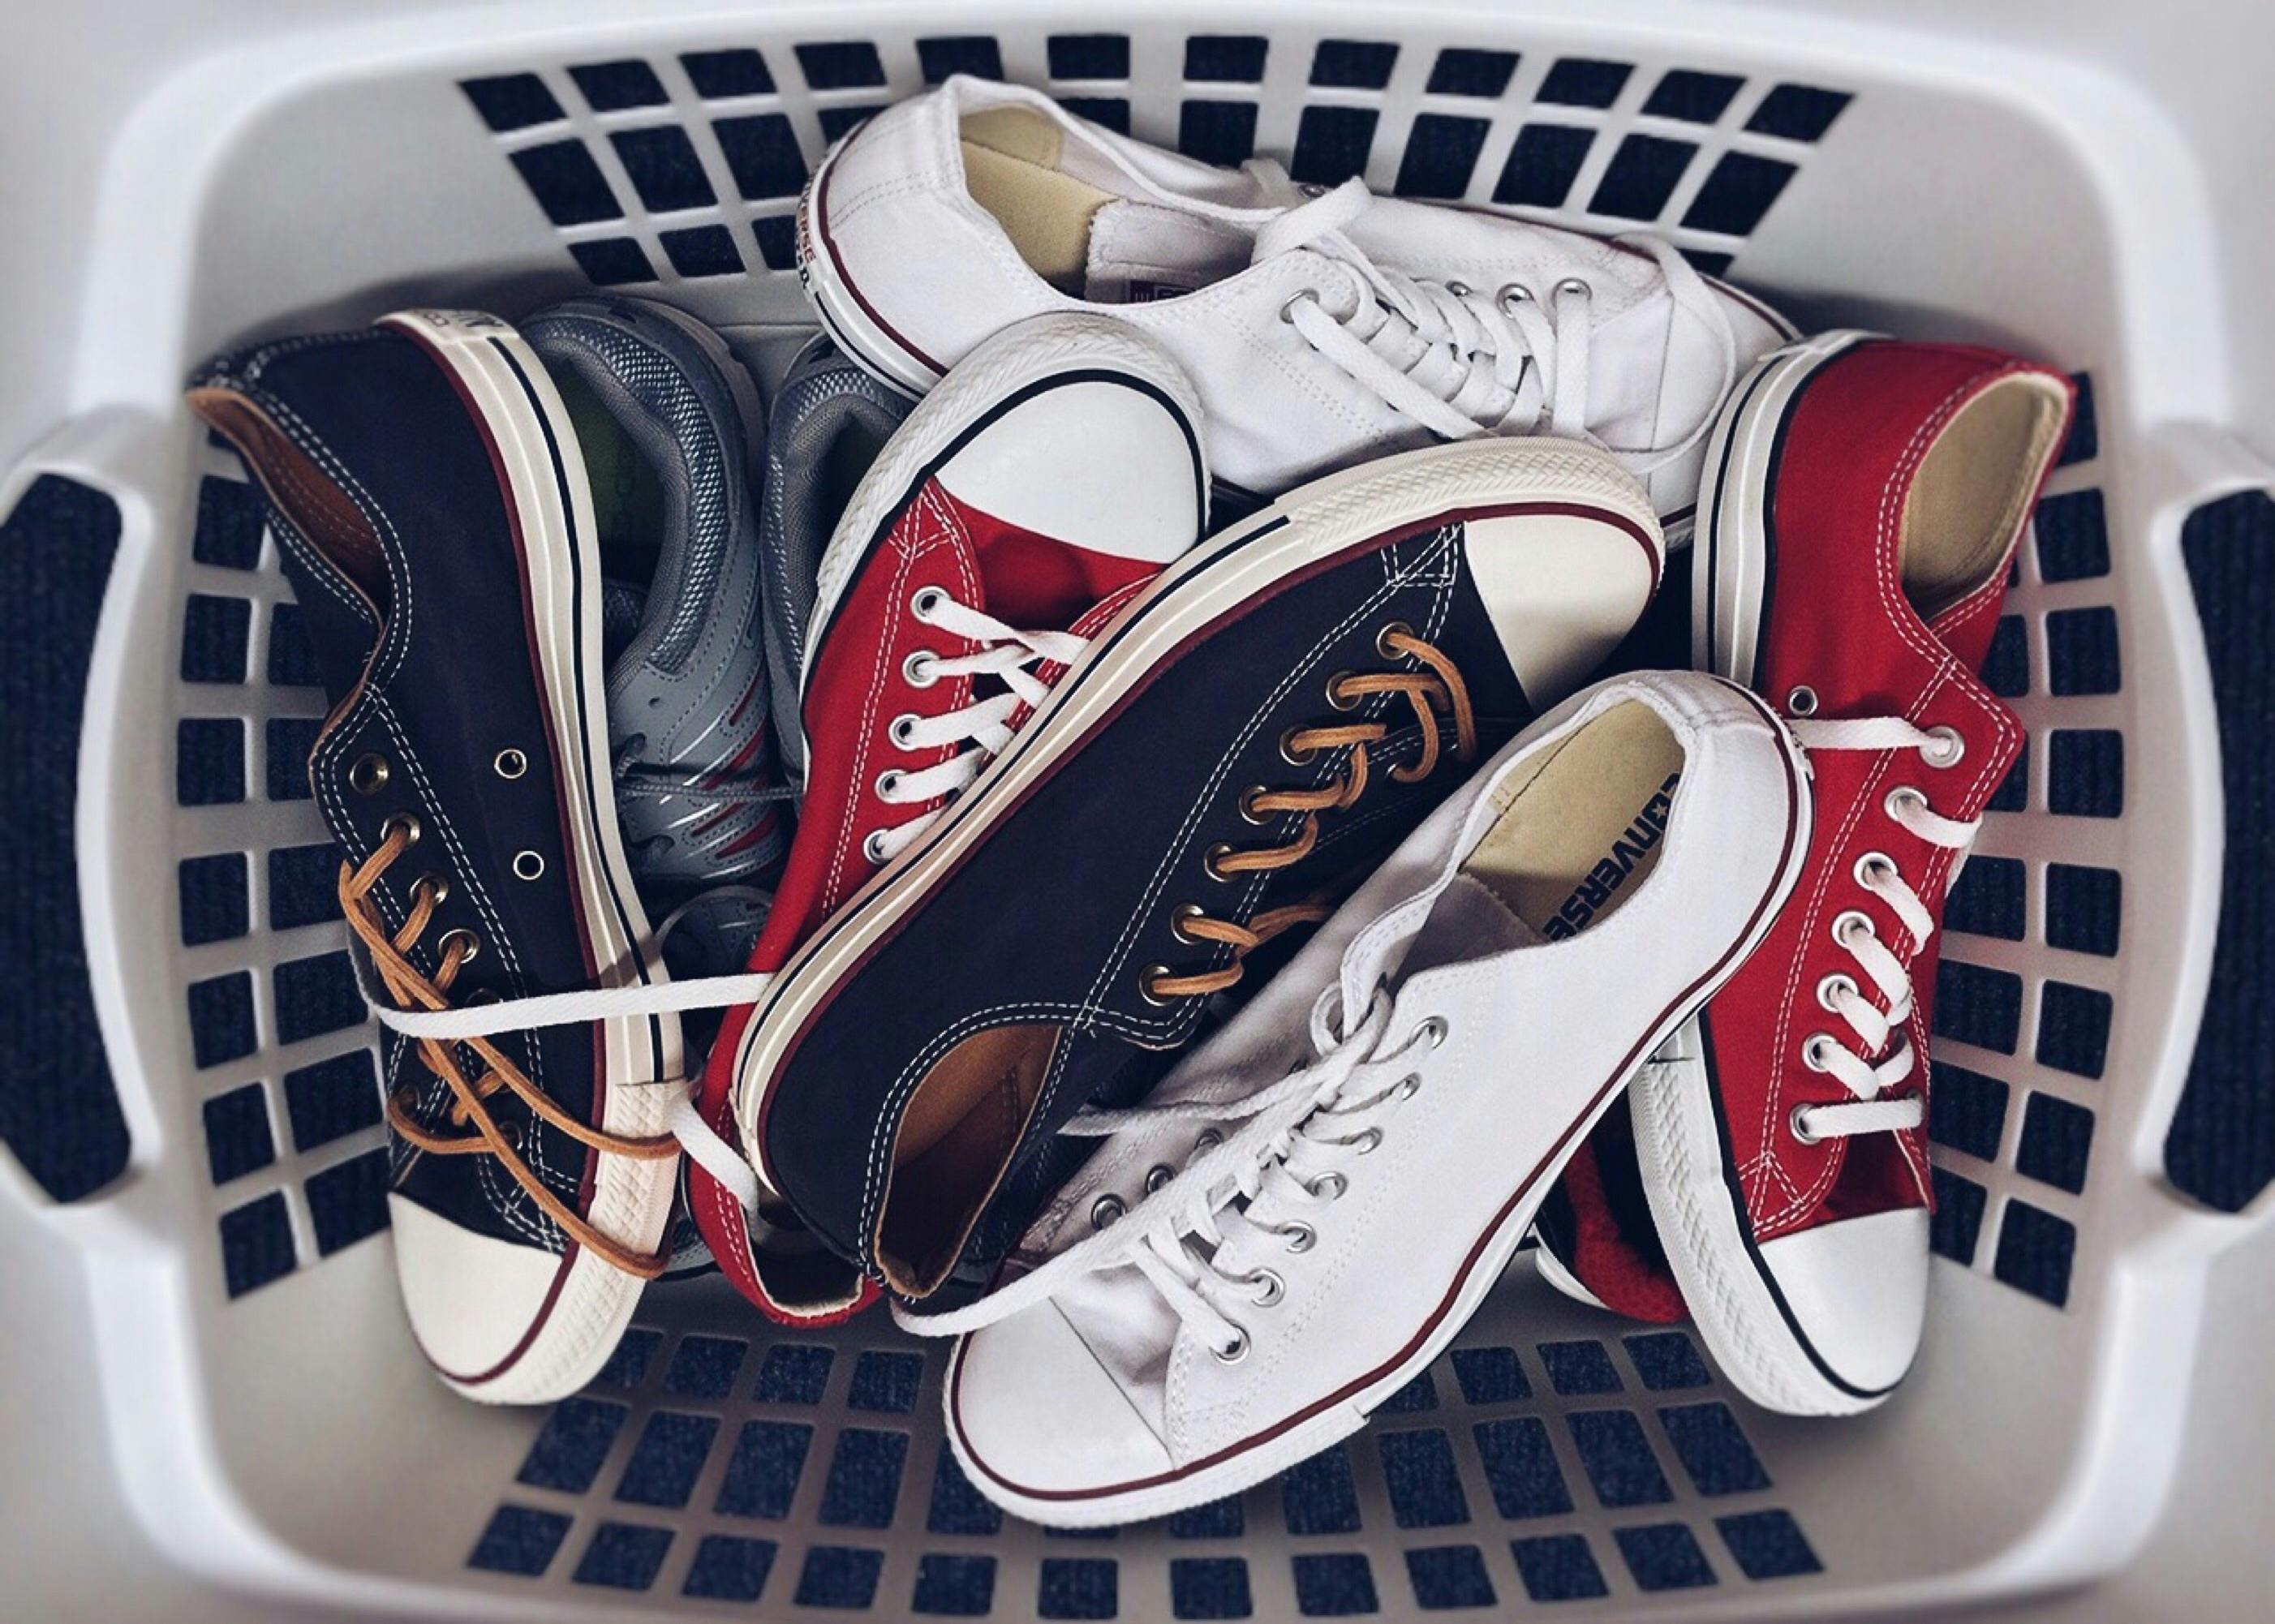 A laundry basket filled with shoes | Source: Pexels